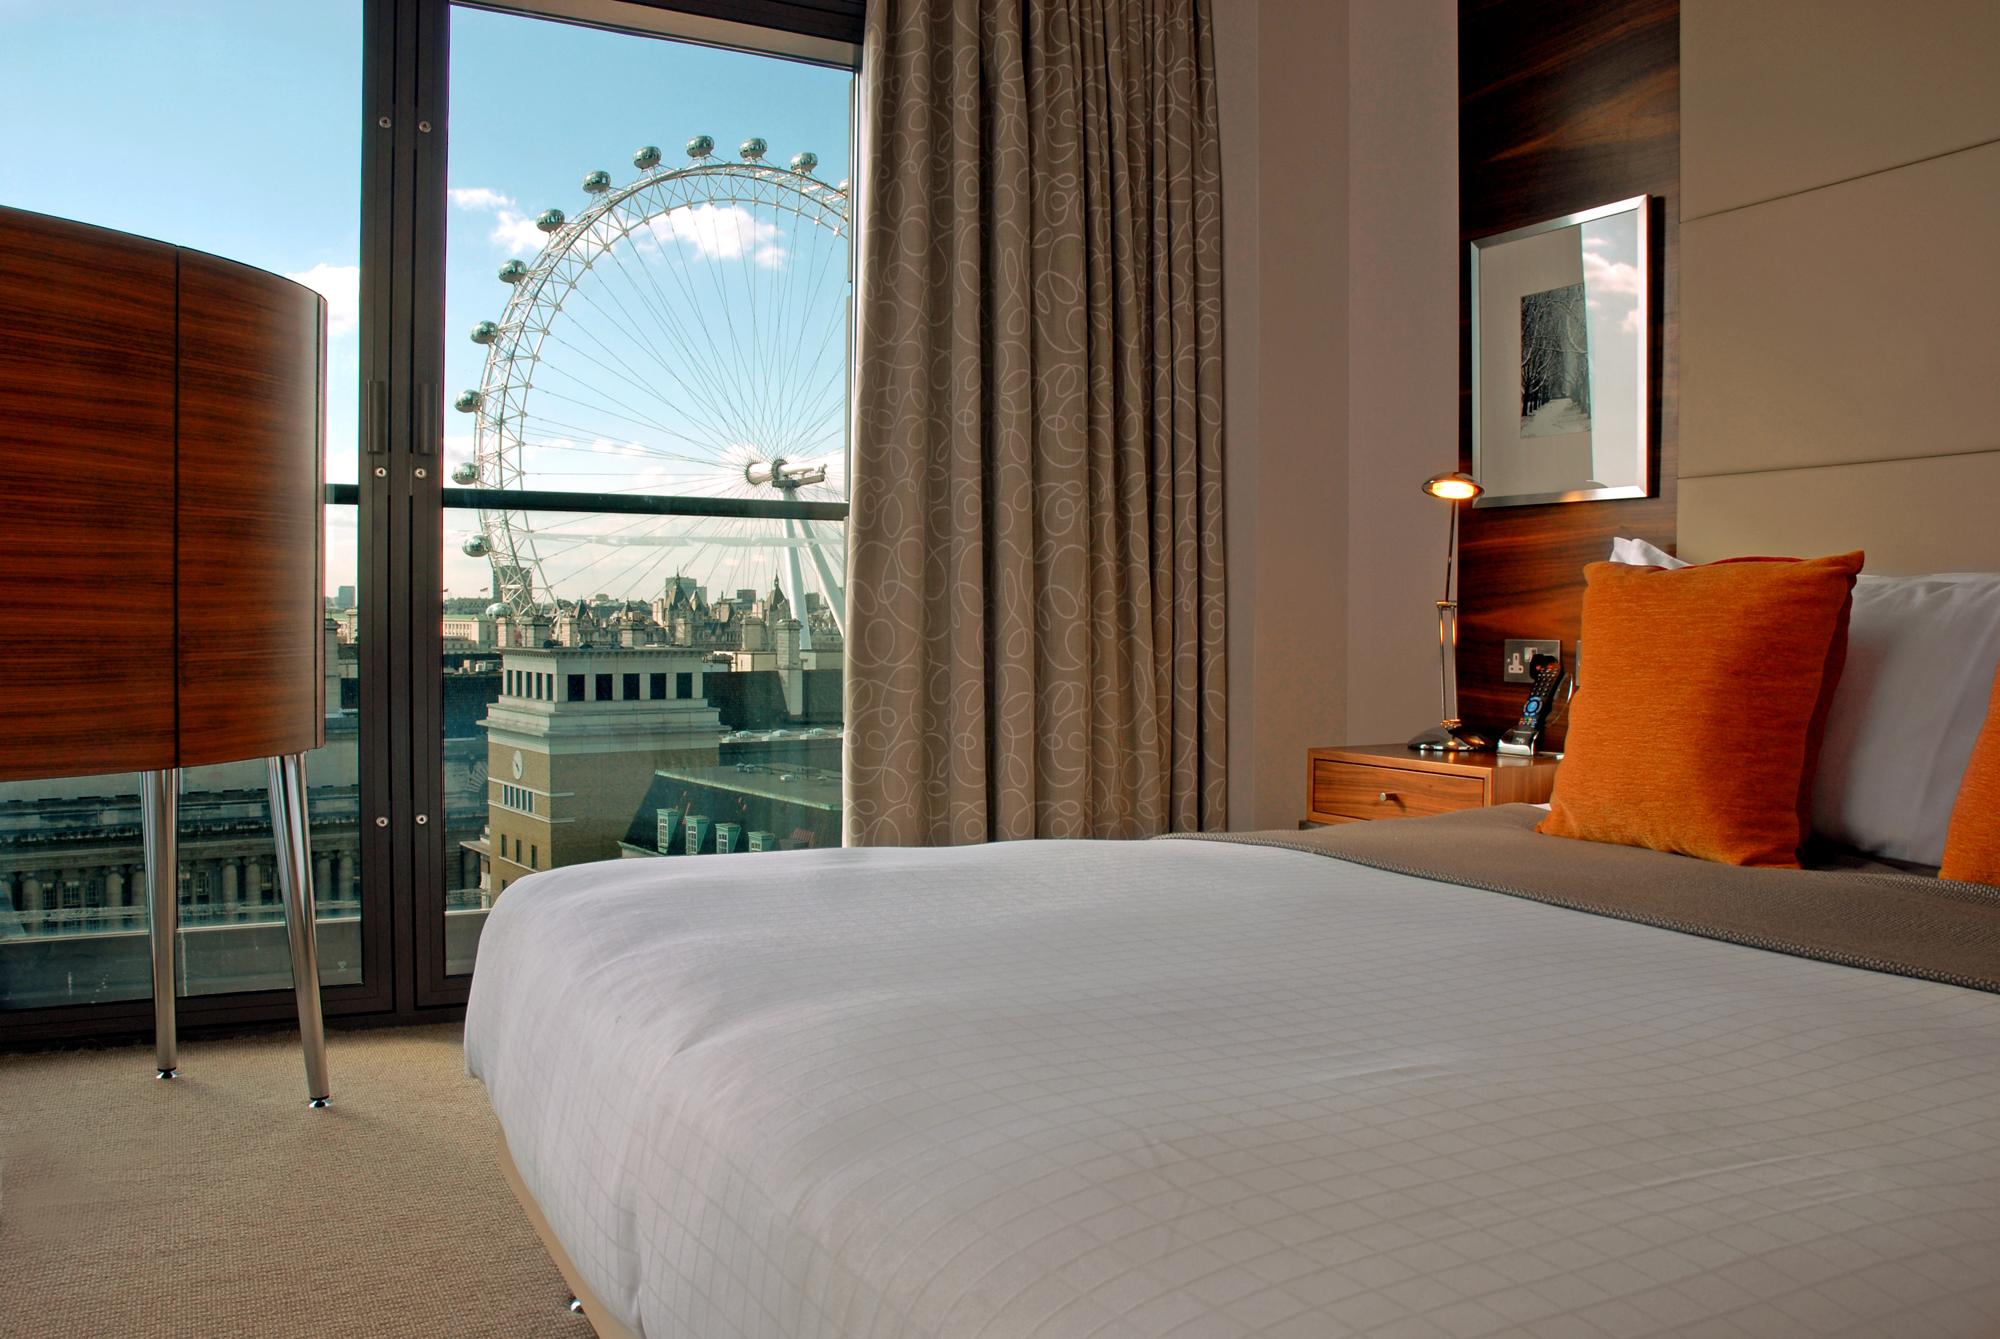 The Park Plaza is perfectly placed for London views